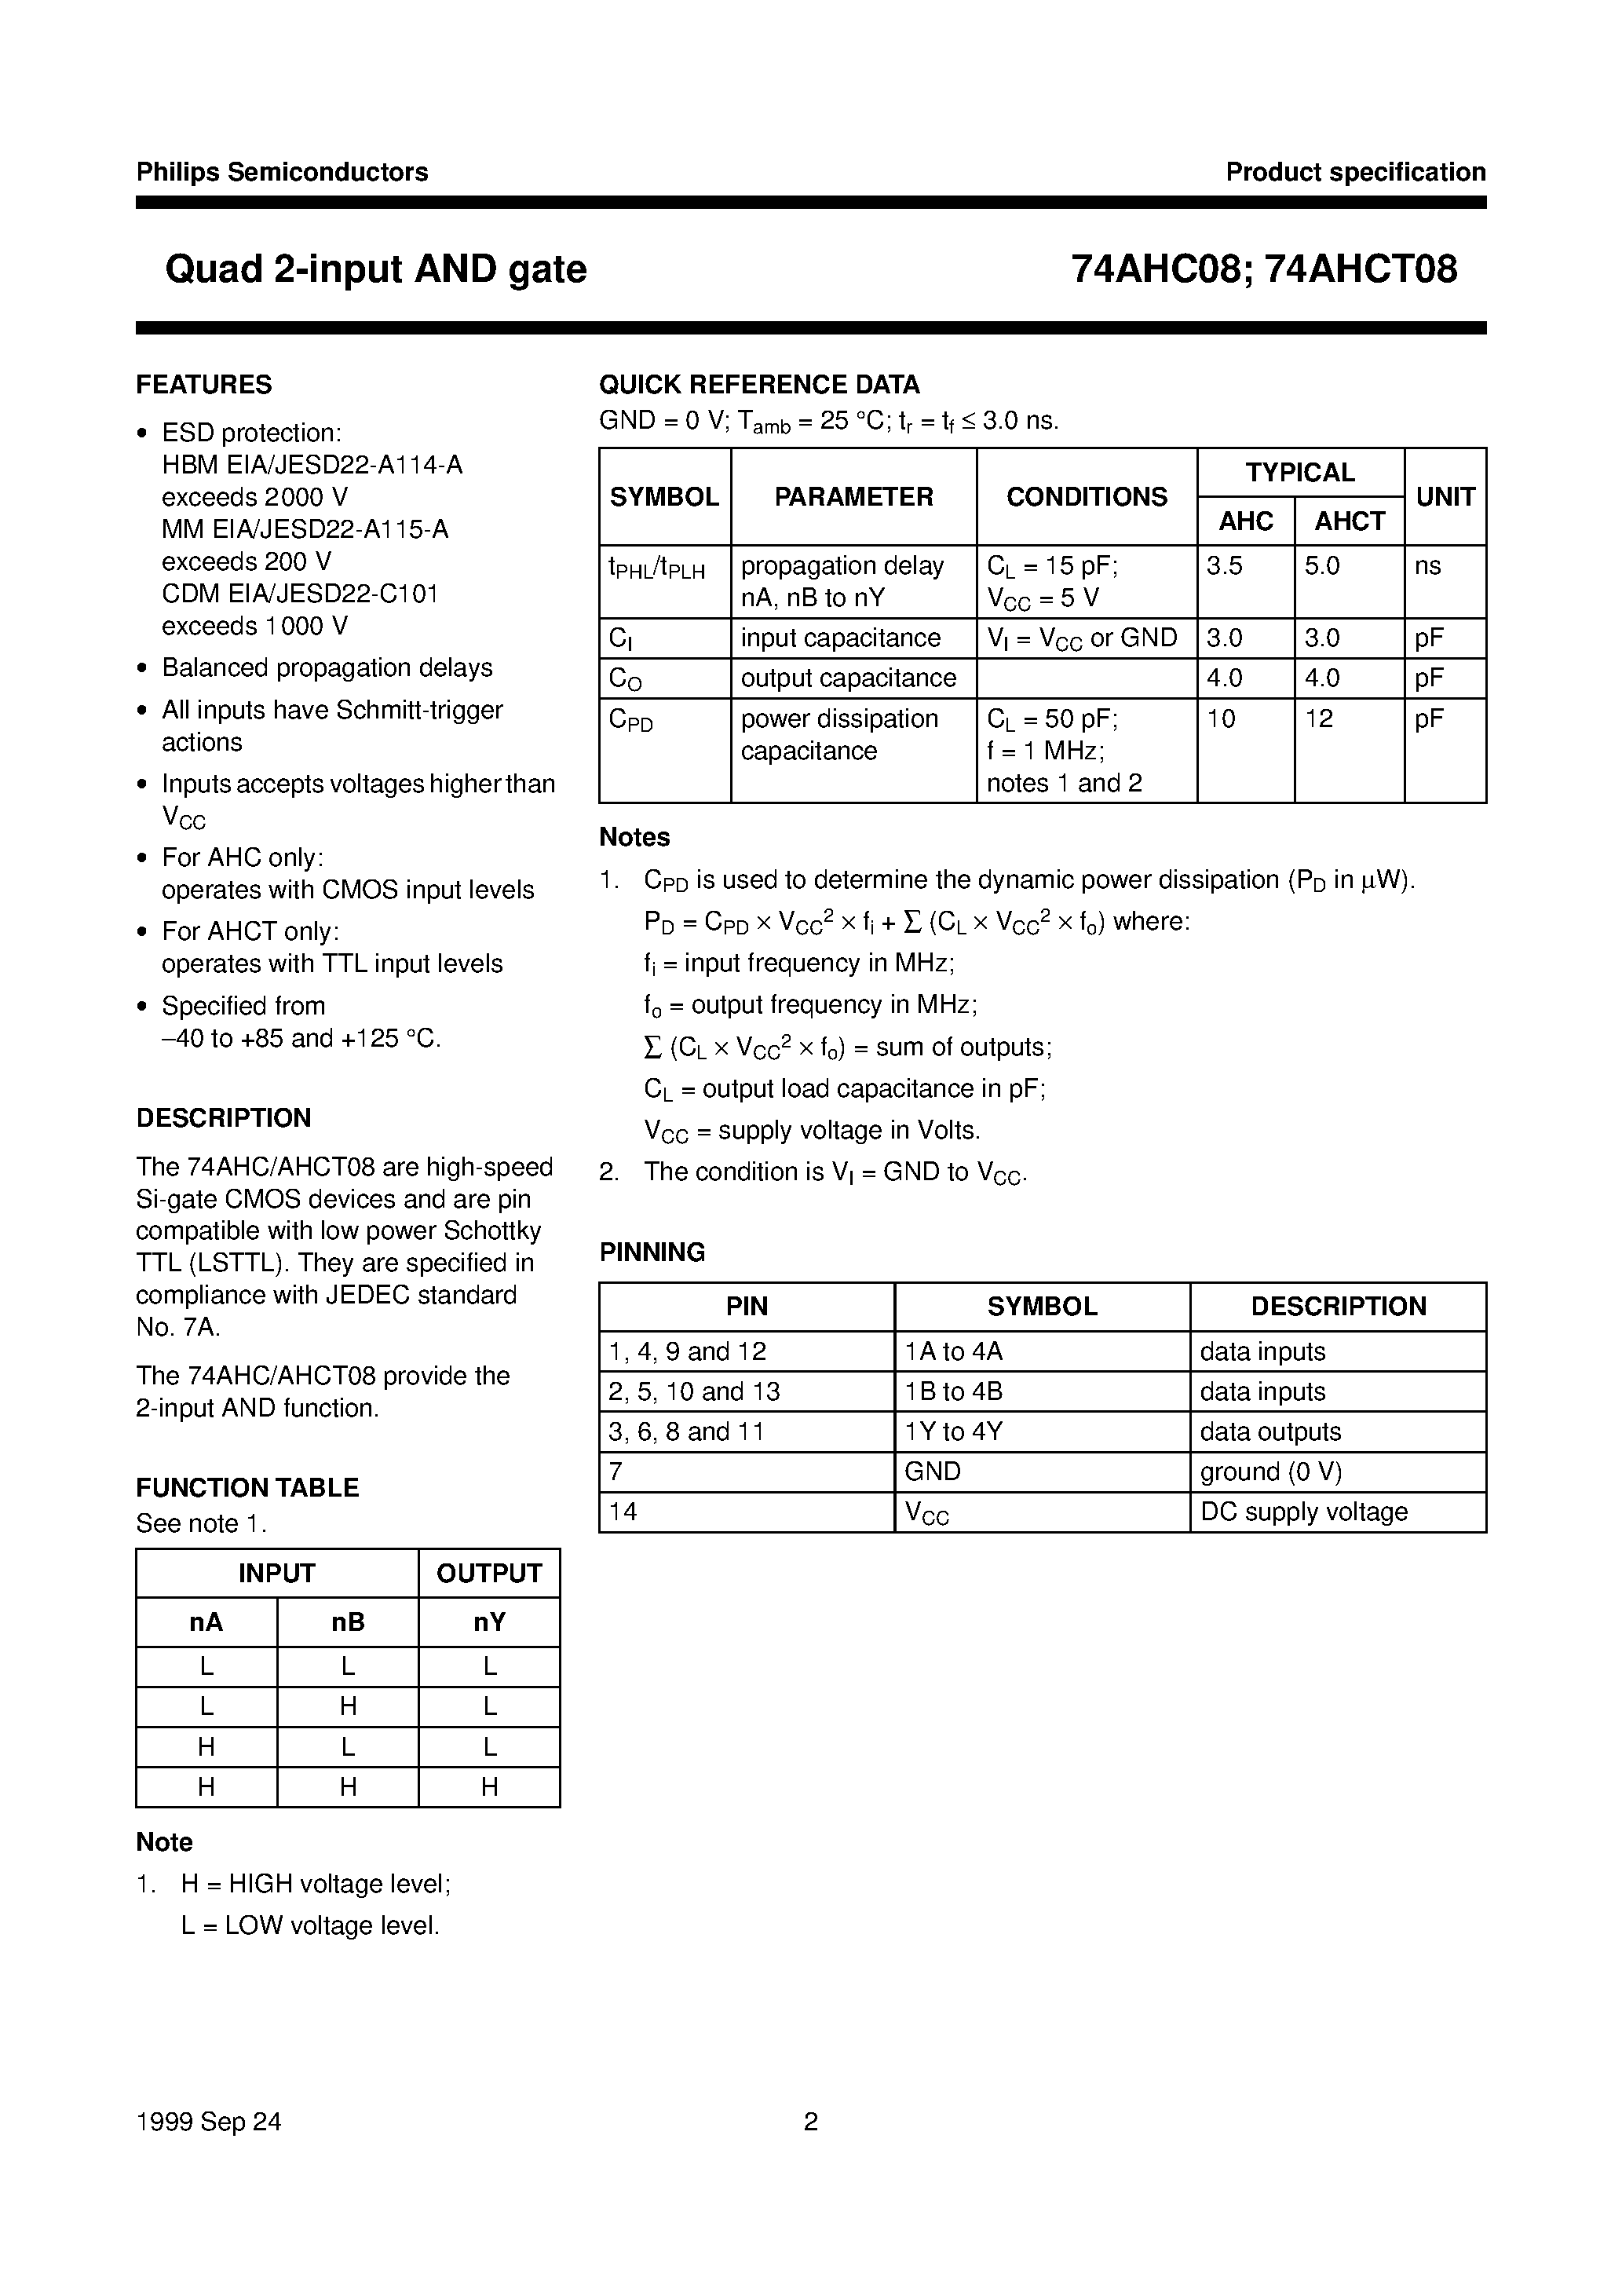 Datasheet 74AHC08PW - Quad 2-input AND gate page 2